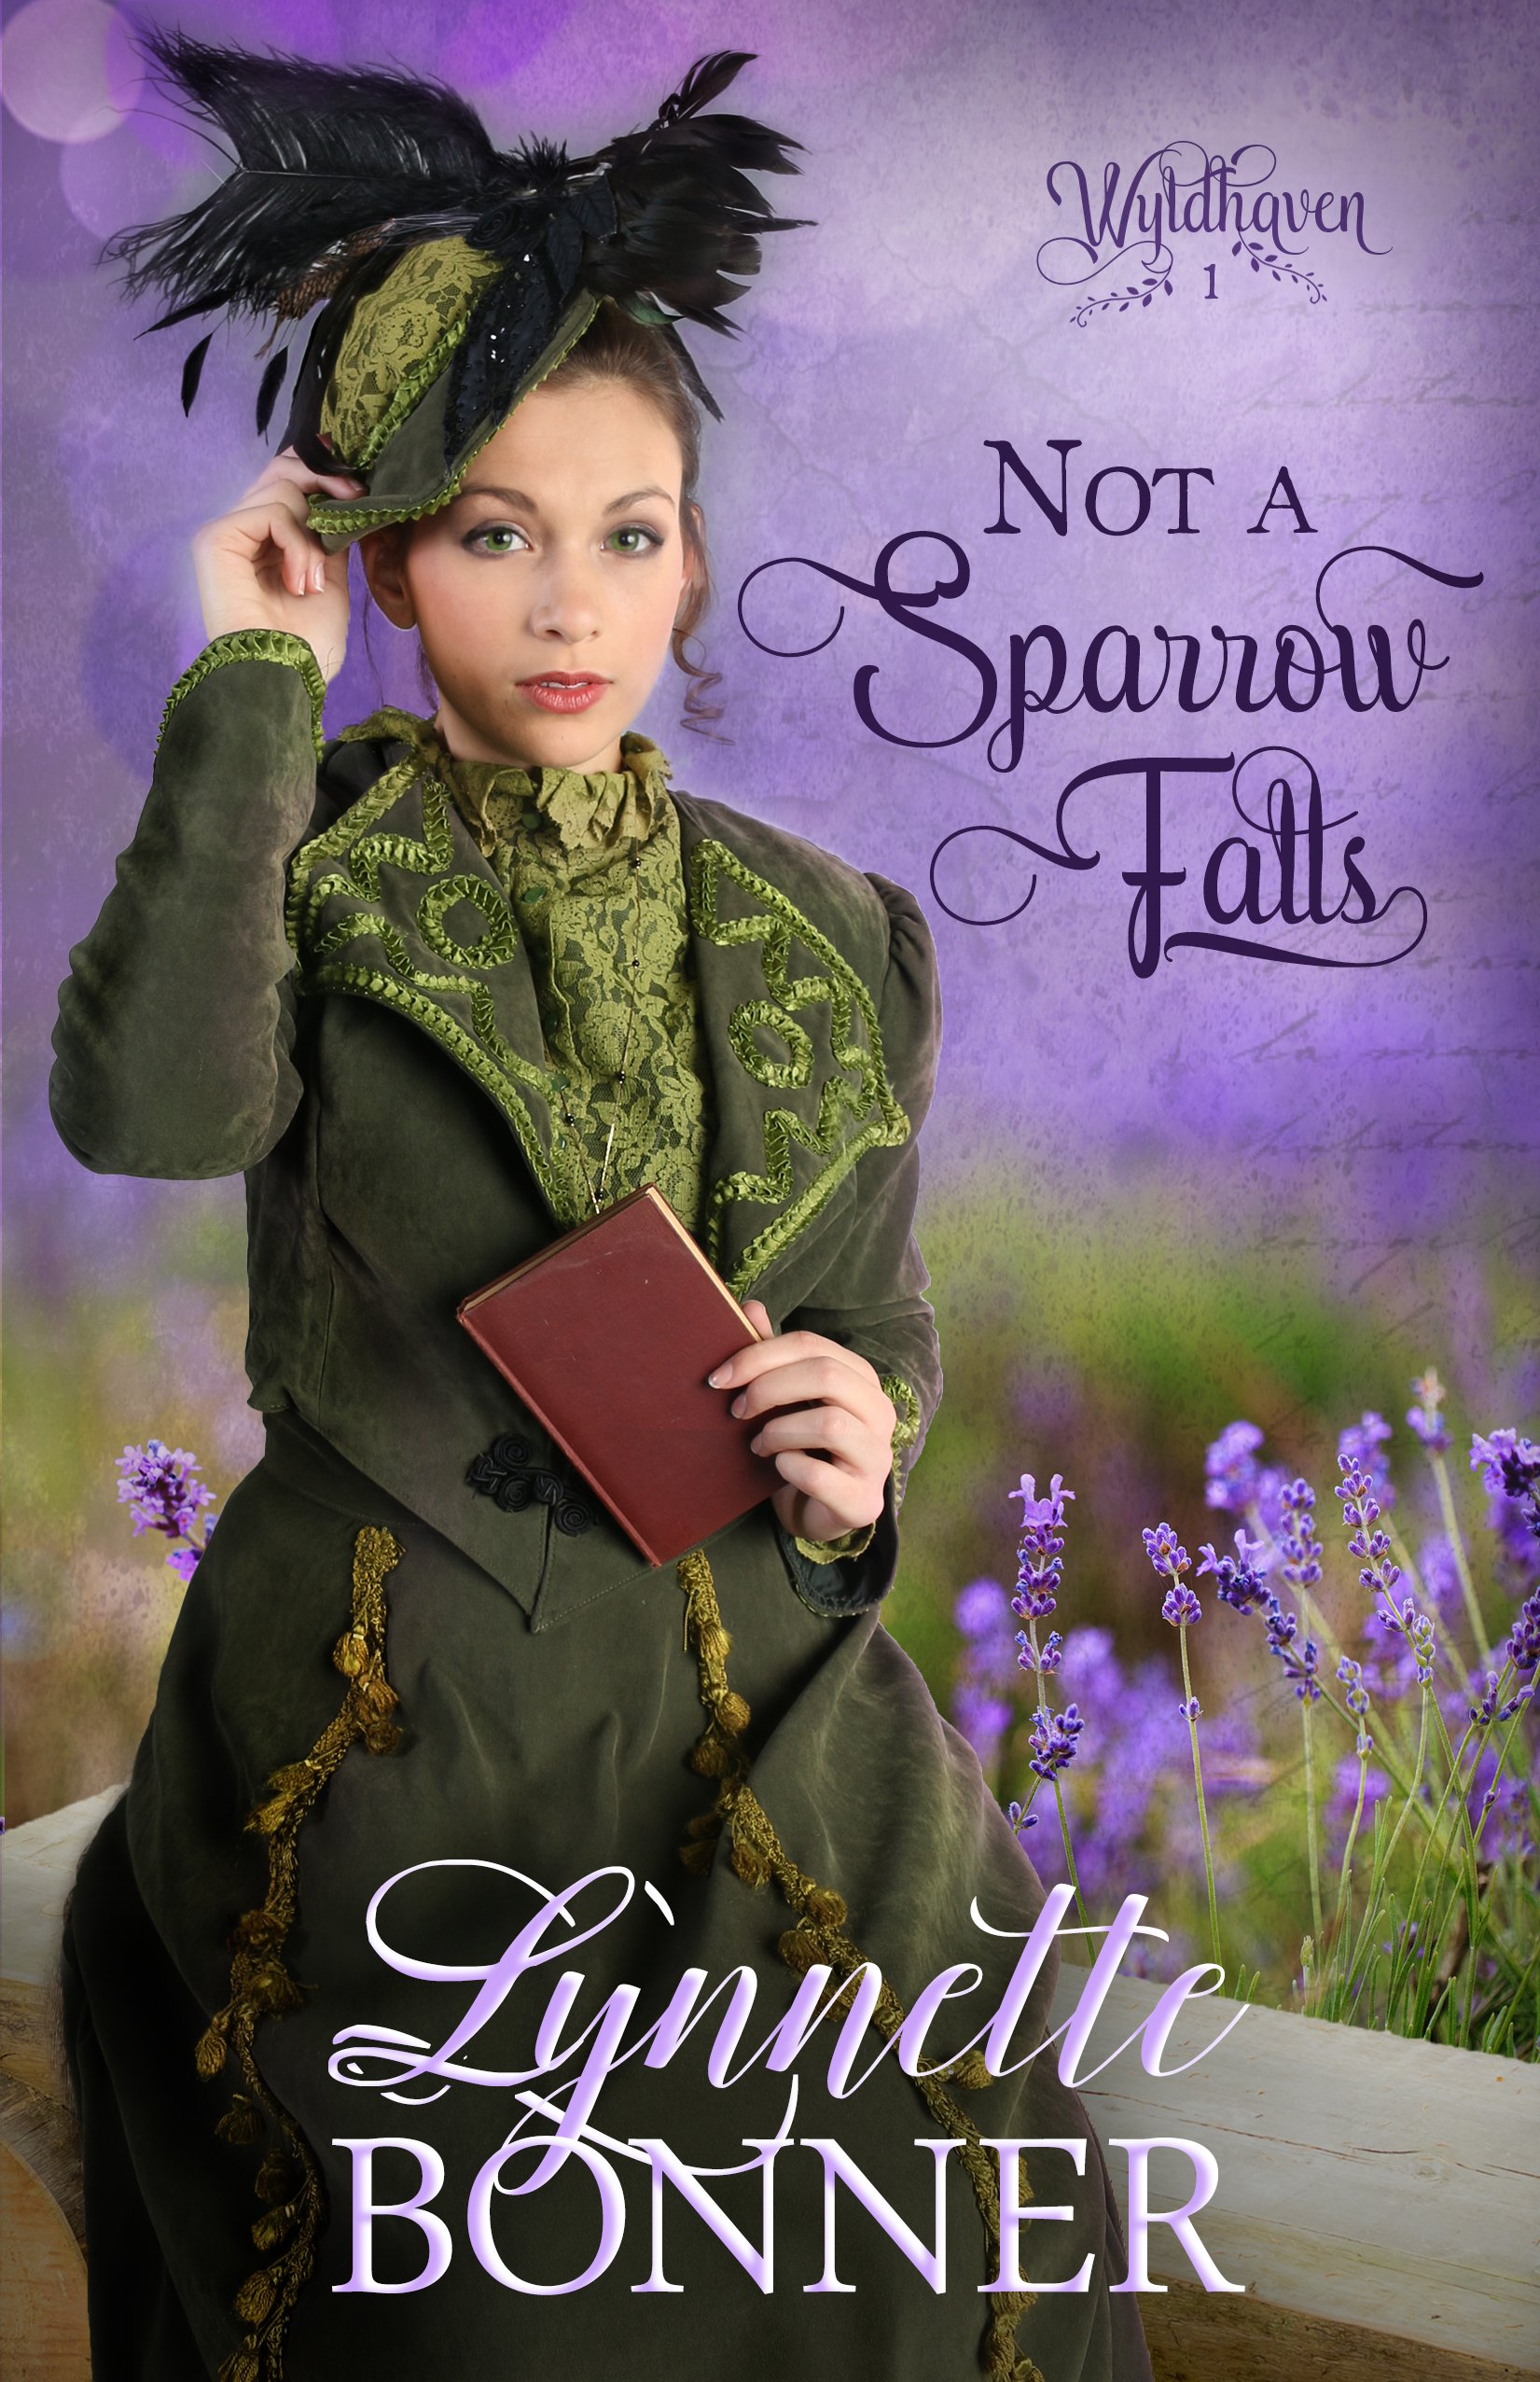 Not a Sparrow Falls: A Christian Historical Western Romance (Wyldhaven Book 1)